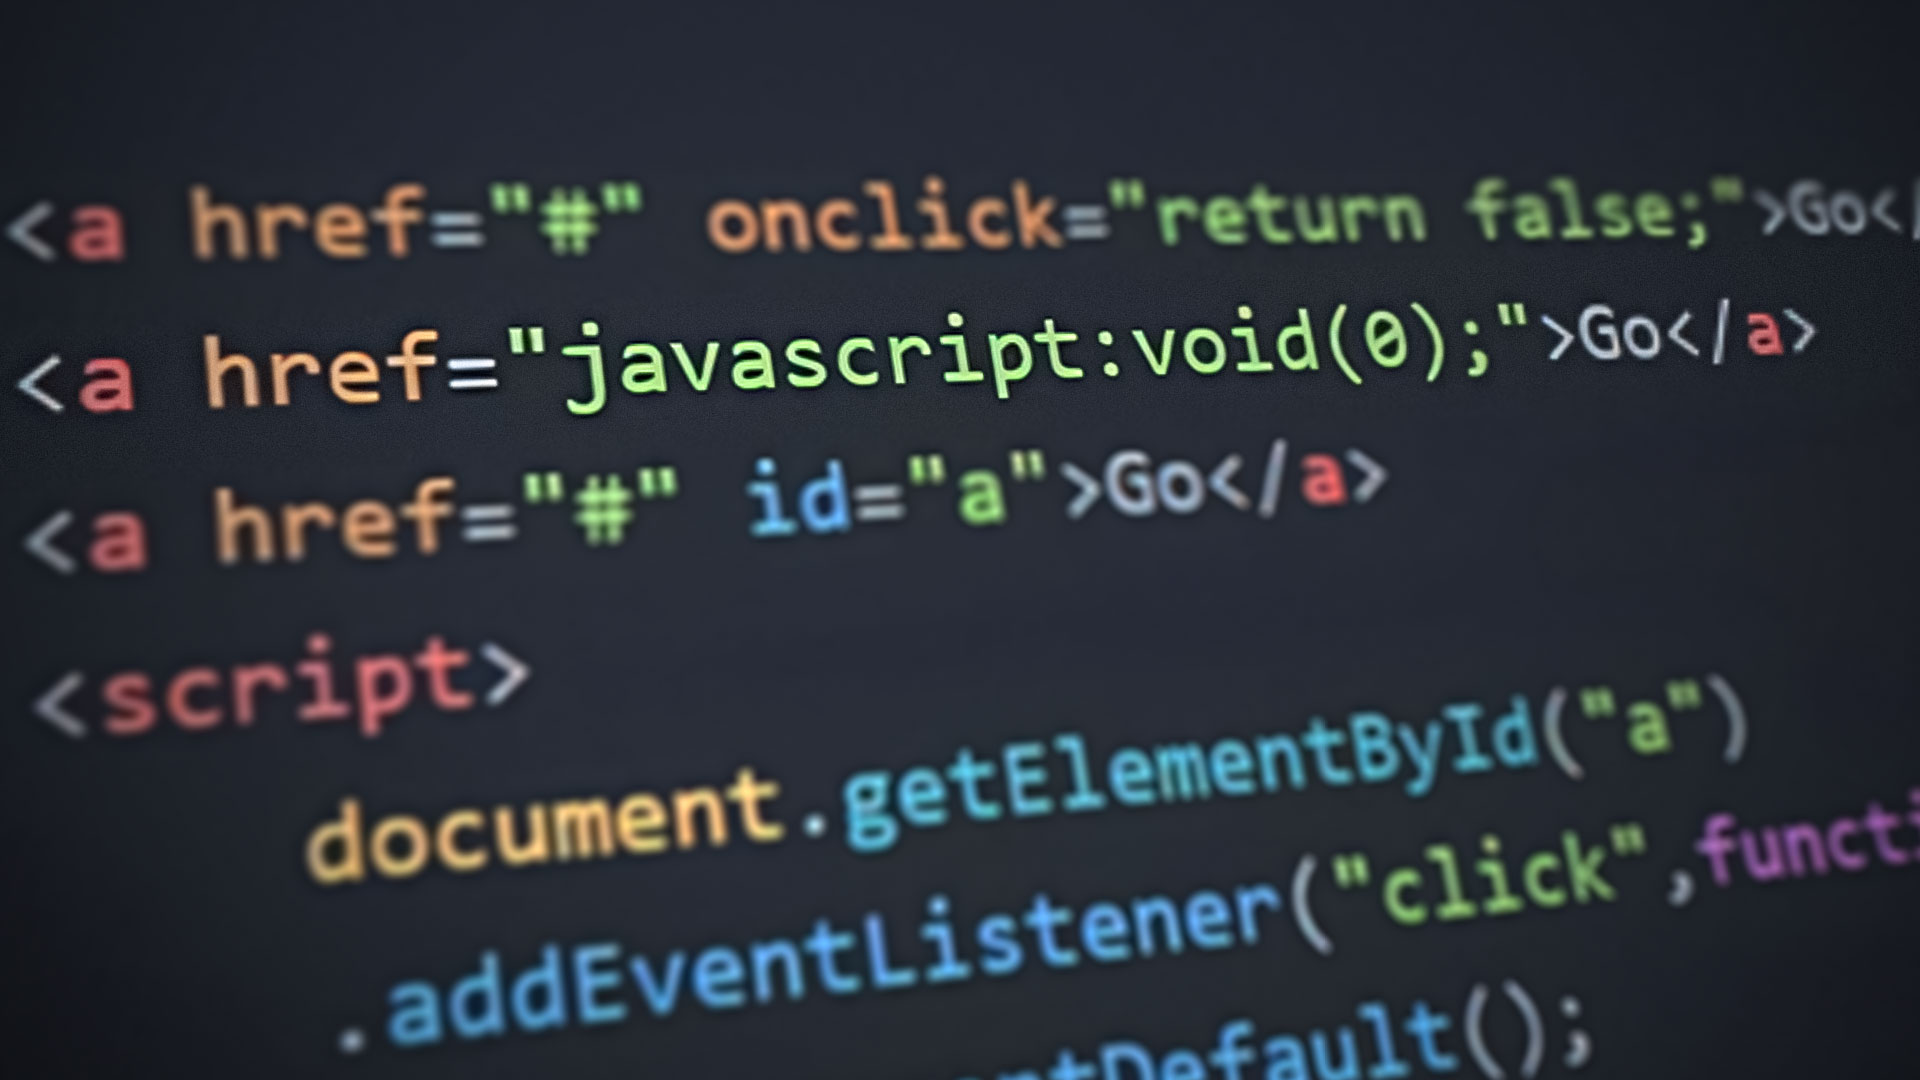 What is Javascript:void(0) And How To Use It?